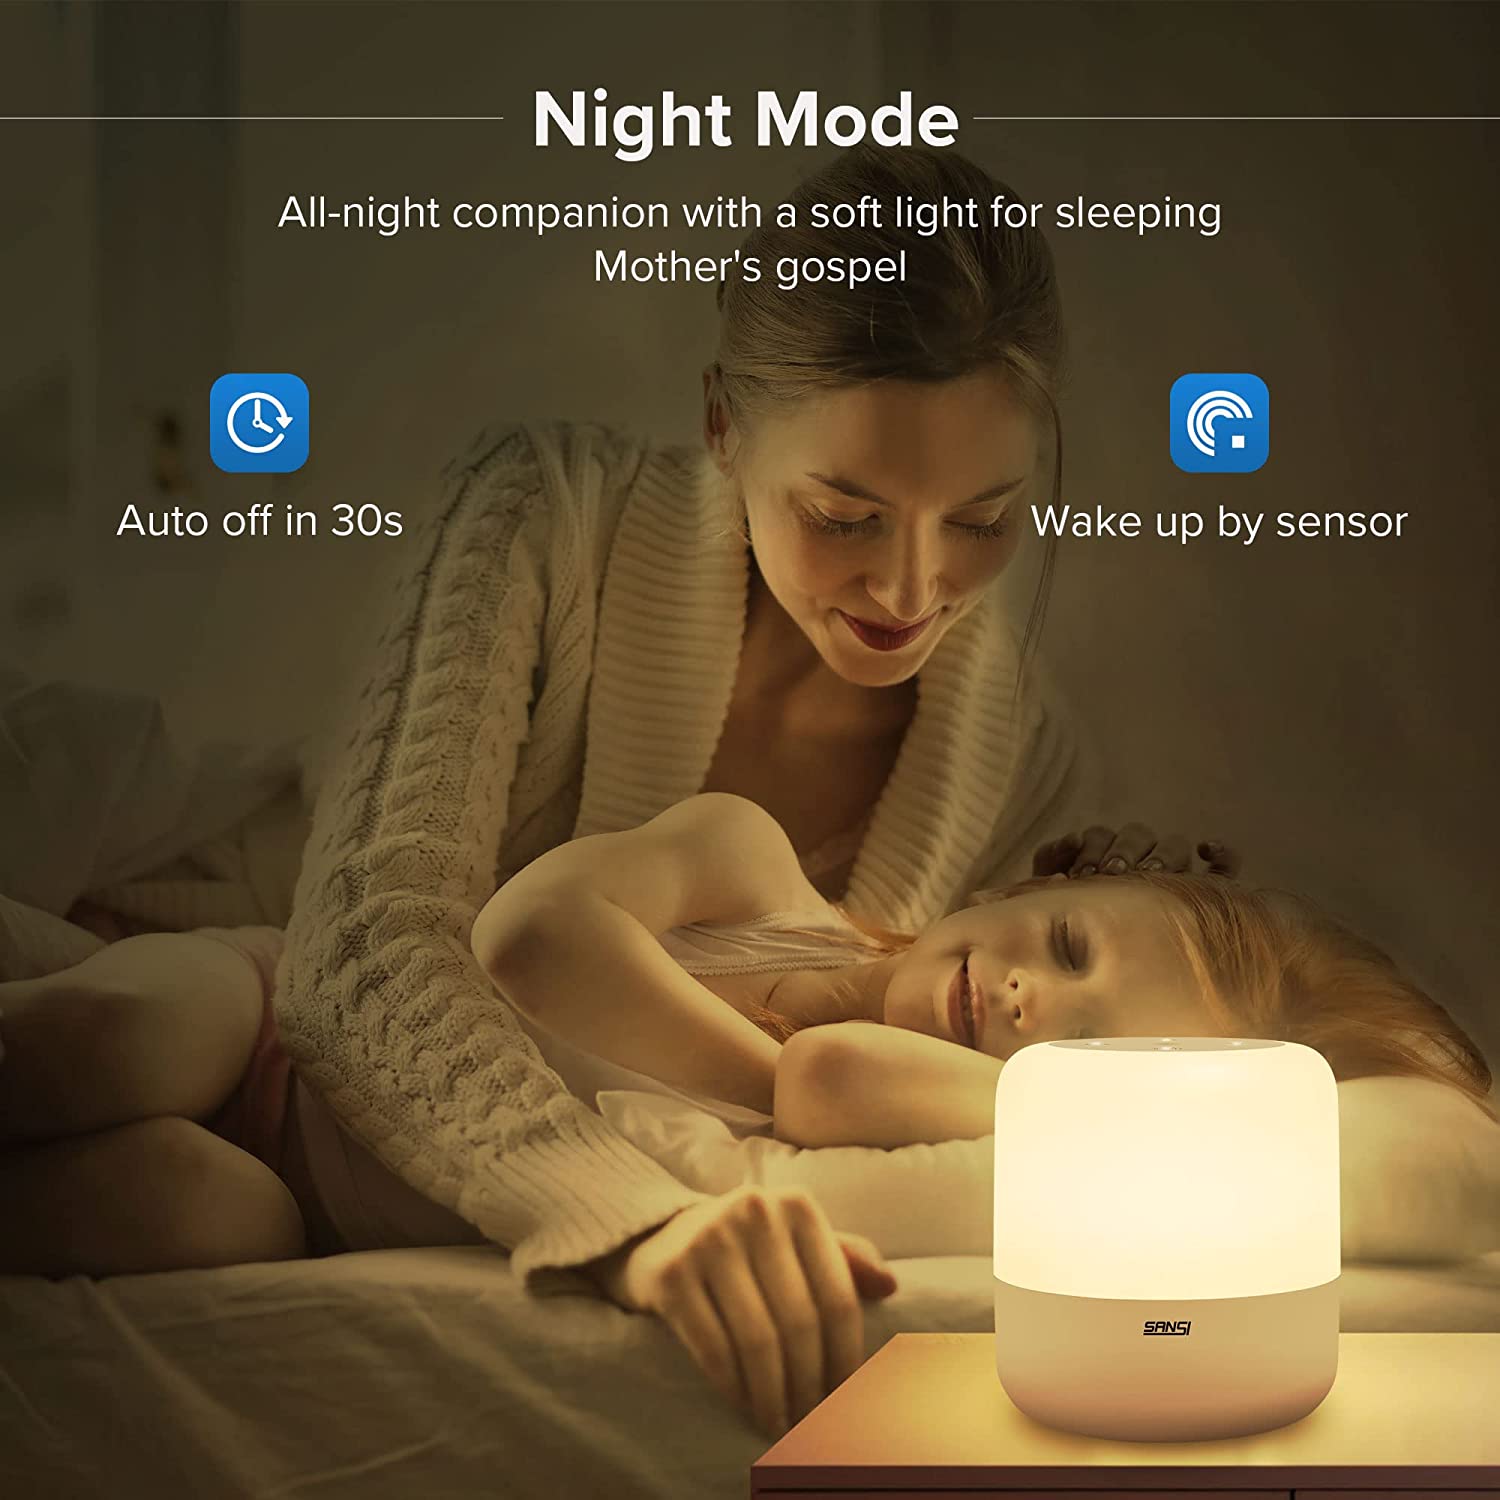 6W LED RGB Touch Sensor Table Lamp (US Only) has night mode，wake up by sensor and auto off in 30 seconds.